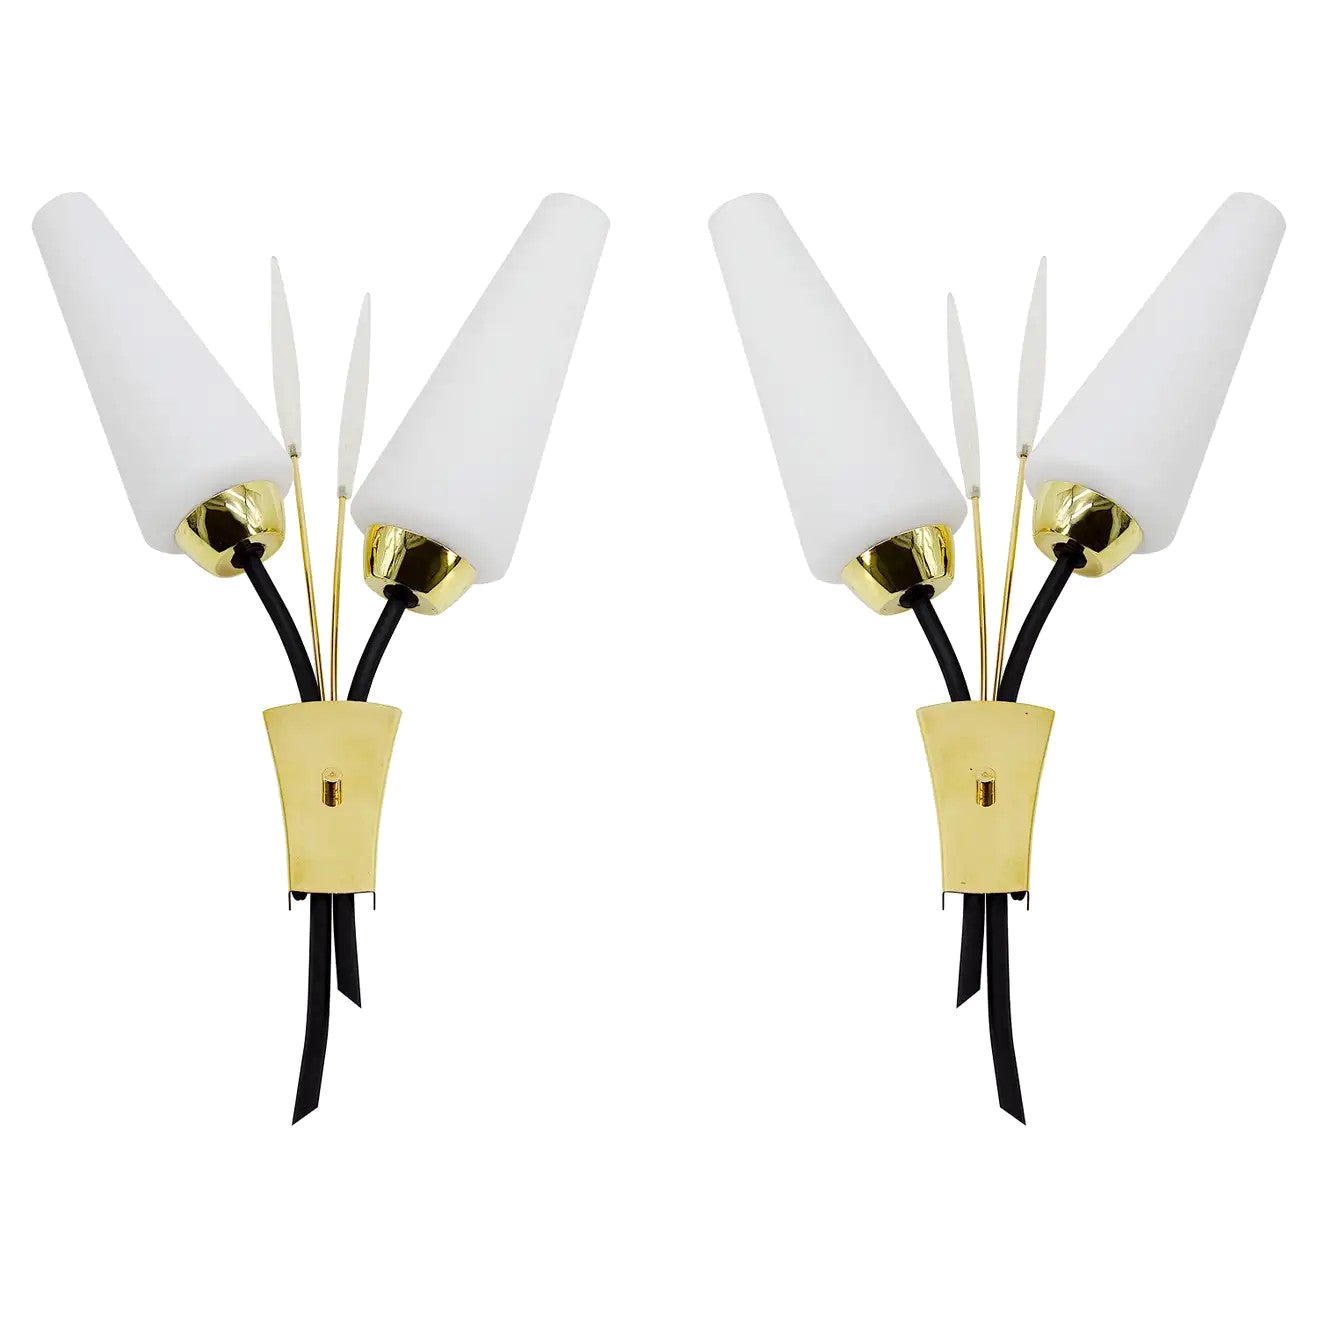 Lunel French Midcentury Wall Lights, Pair, 1950s